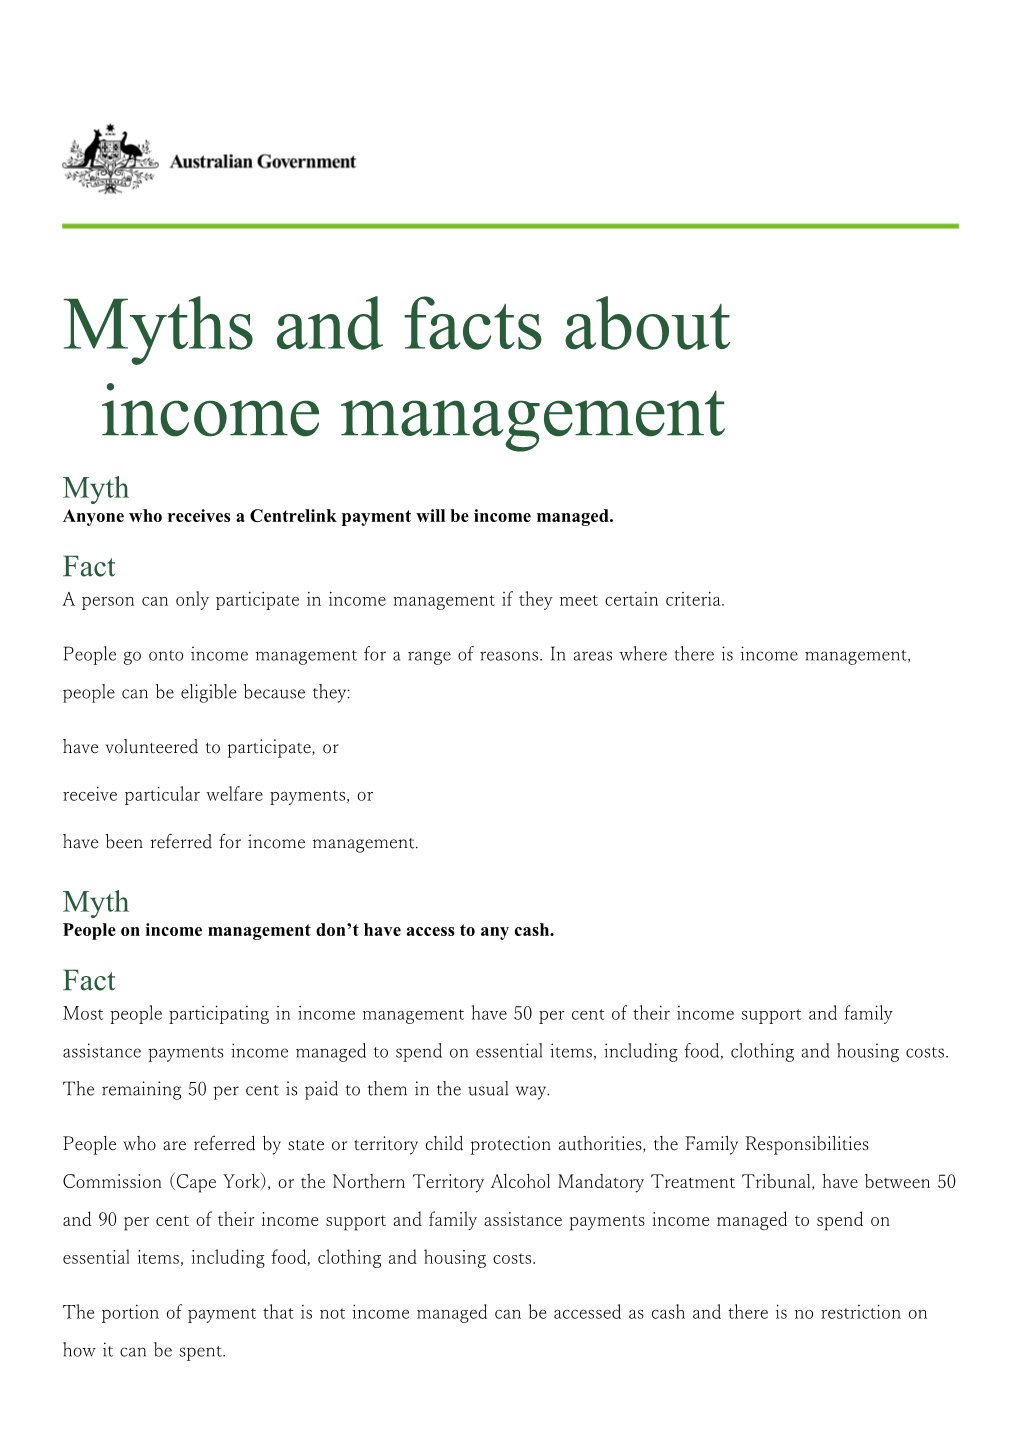 Myths and Facts About Income Management